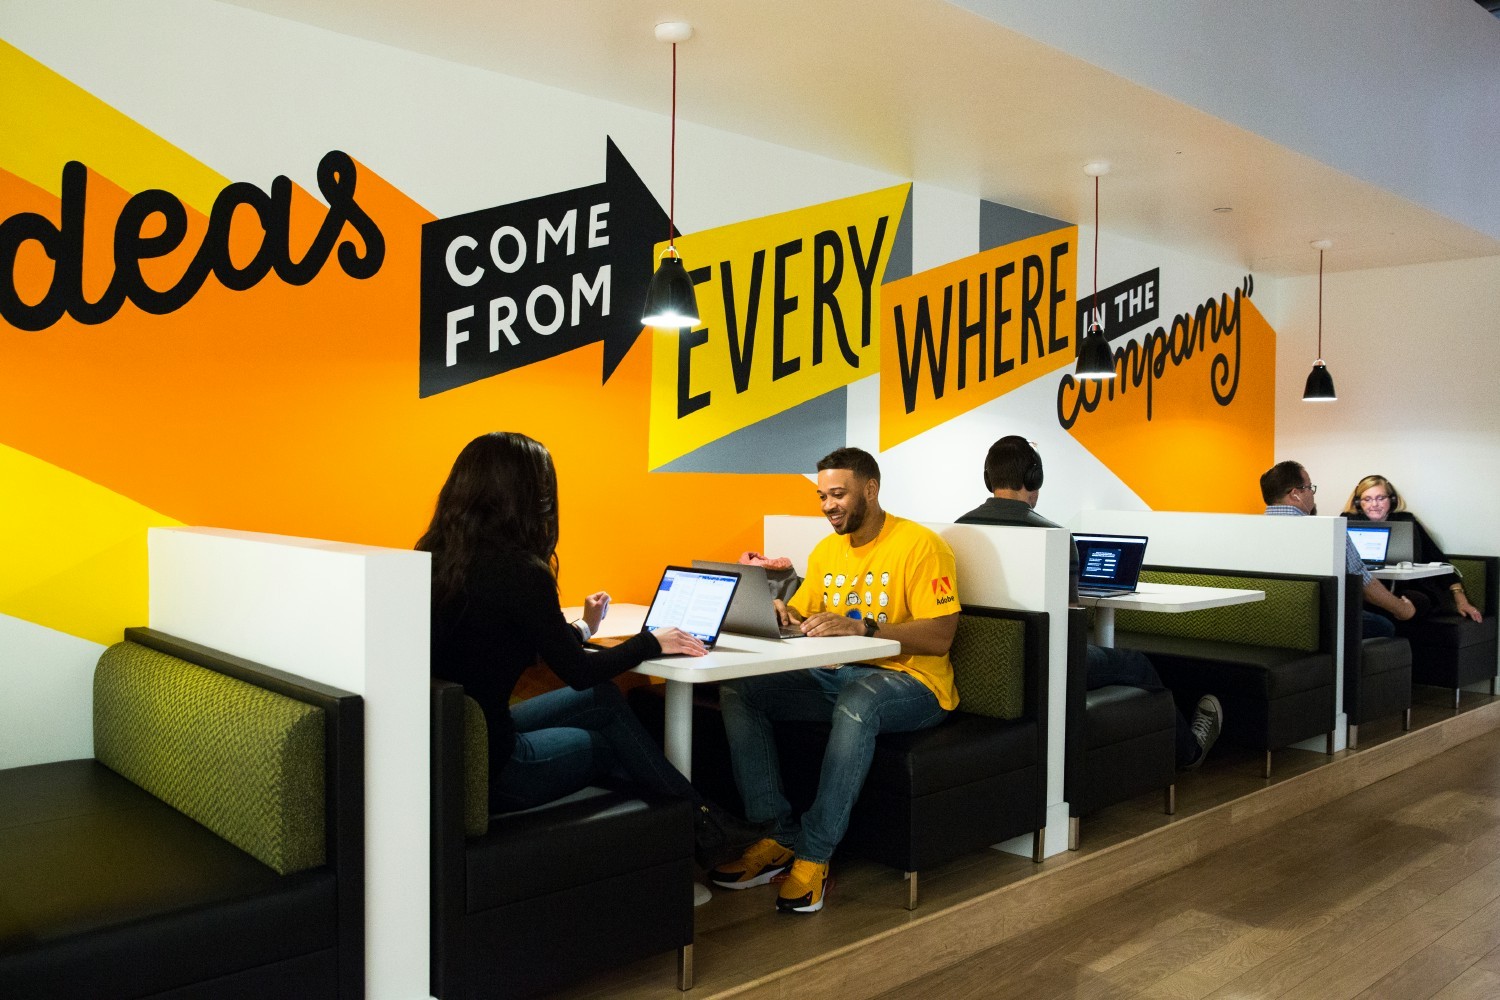 At Adobe, we believe that great ideas come from everywhere in the company